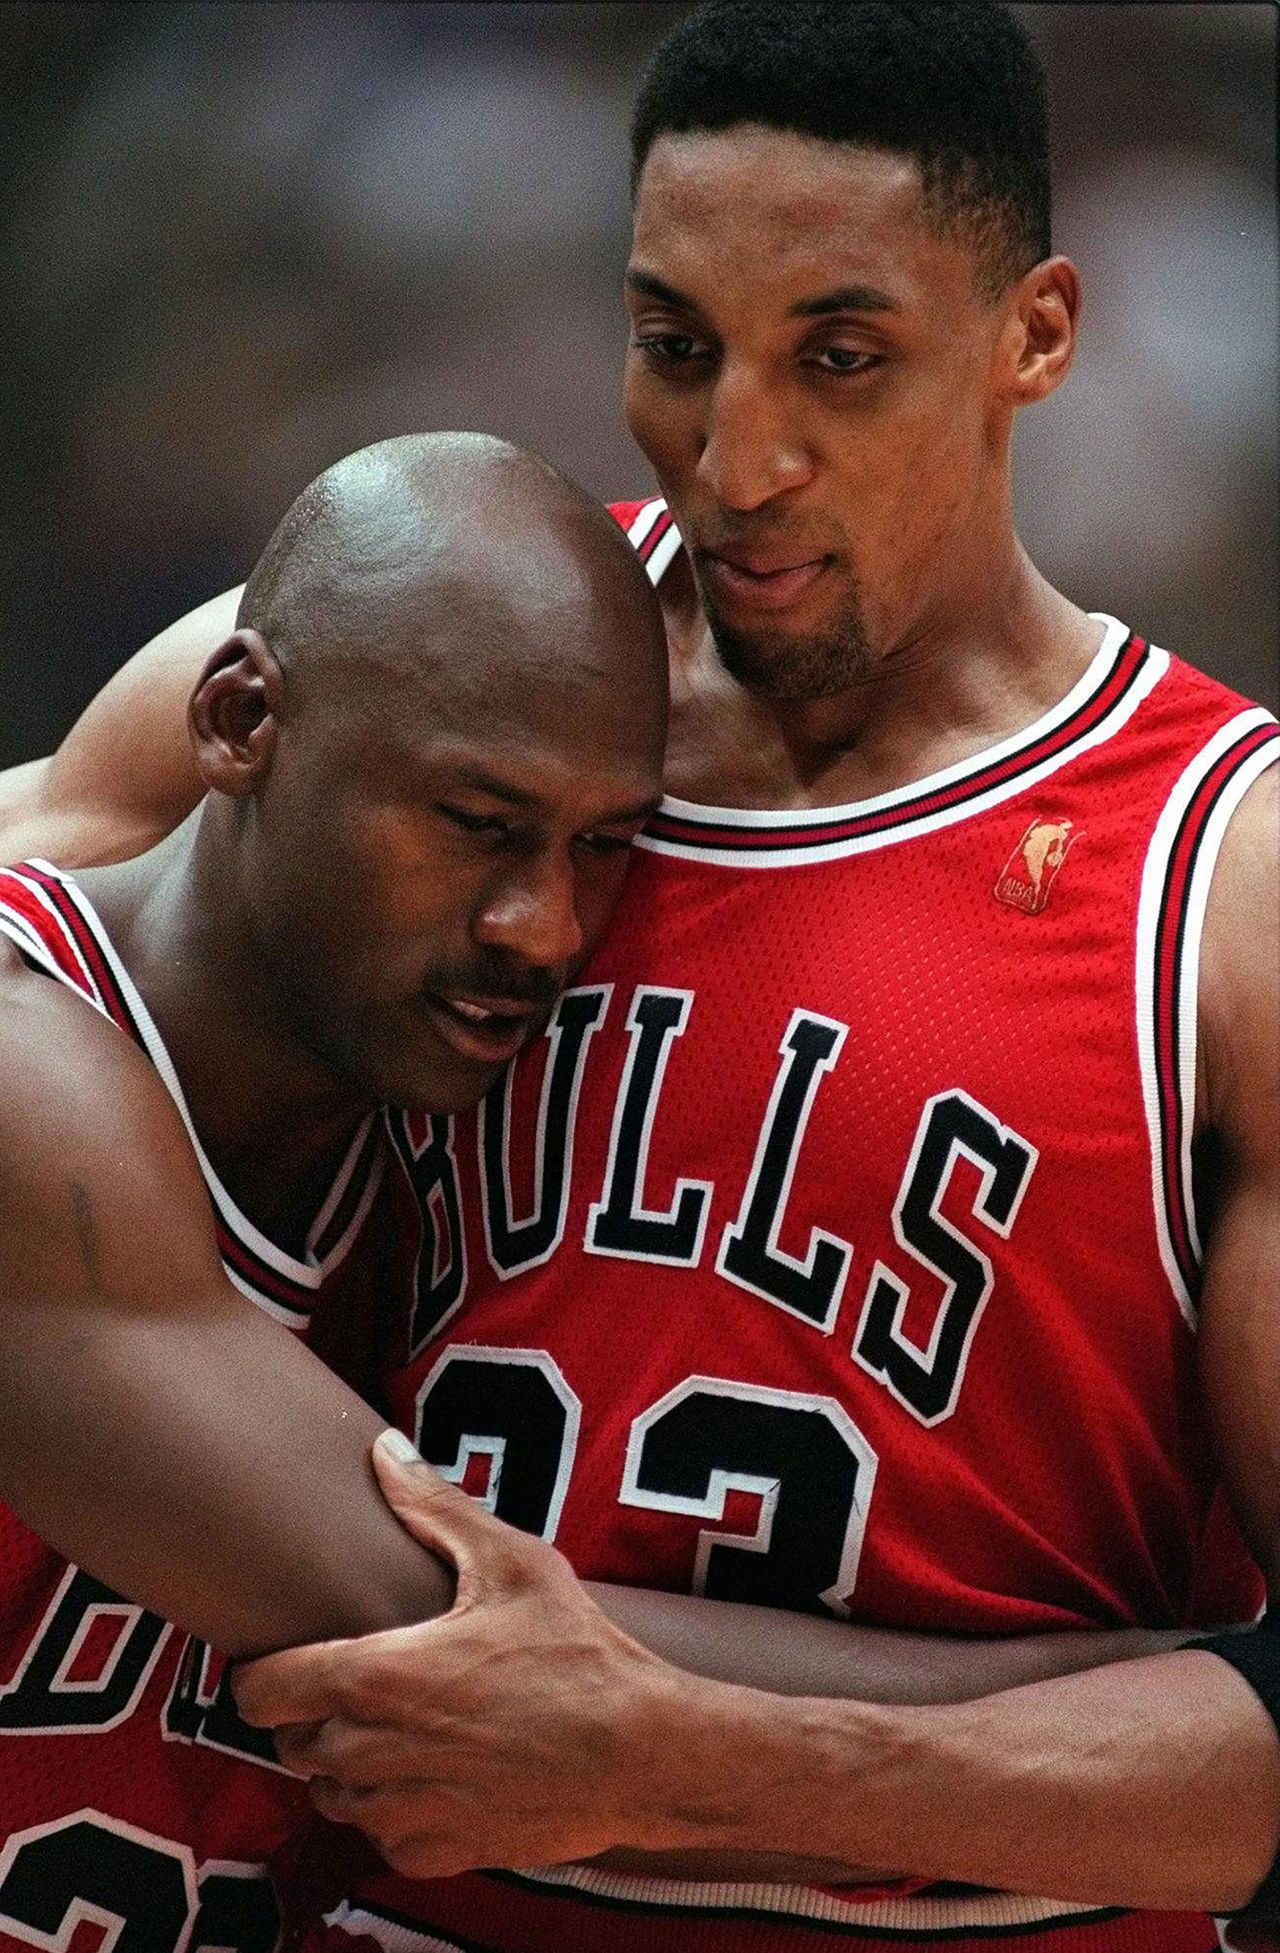 Pippen holds up Jordan during the famous "flu game" in the 1997 NBA Finals. Jordan was battling flu-like symptoms during Game 5, but he still went on to score 38 points and hit the game-winning 3-pointer against the Utah Jazz. (In "The Last Dance," Jordan said it was food poisoning he was suffering from, not the flu.) The Bulls went on to win Game 6 for their second straight title and their fifth of the decade.